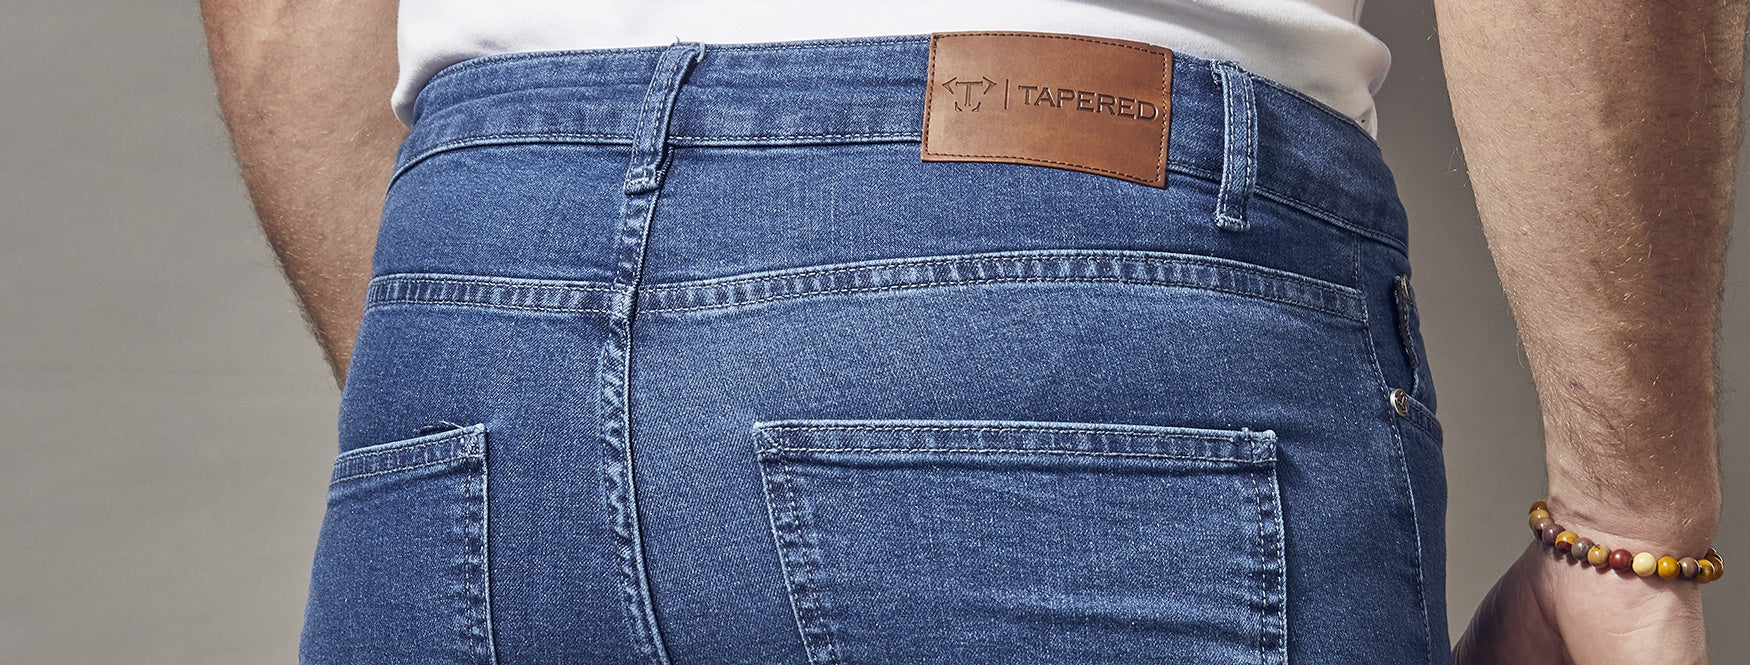 Should You Have Jeans Tailored? by Tapered Menswear